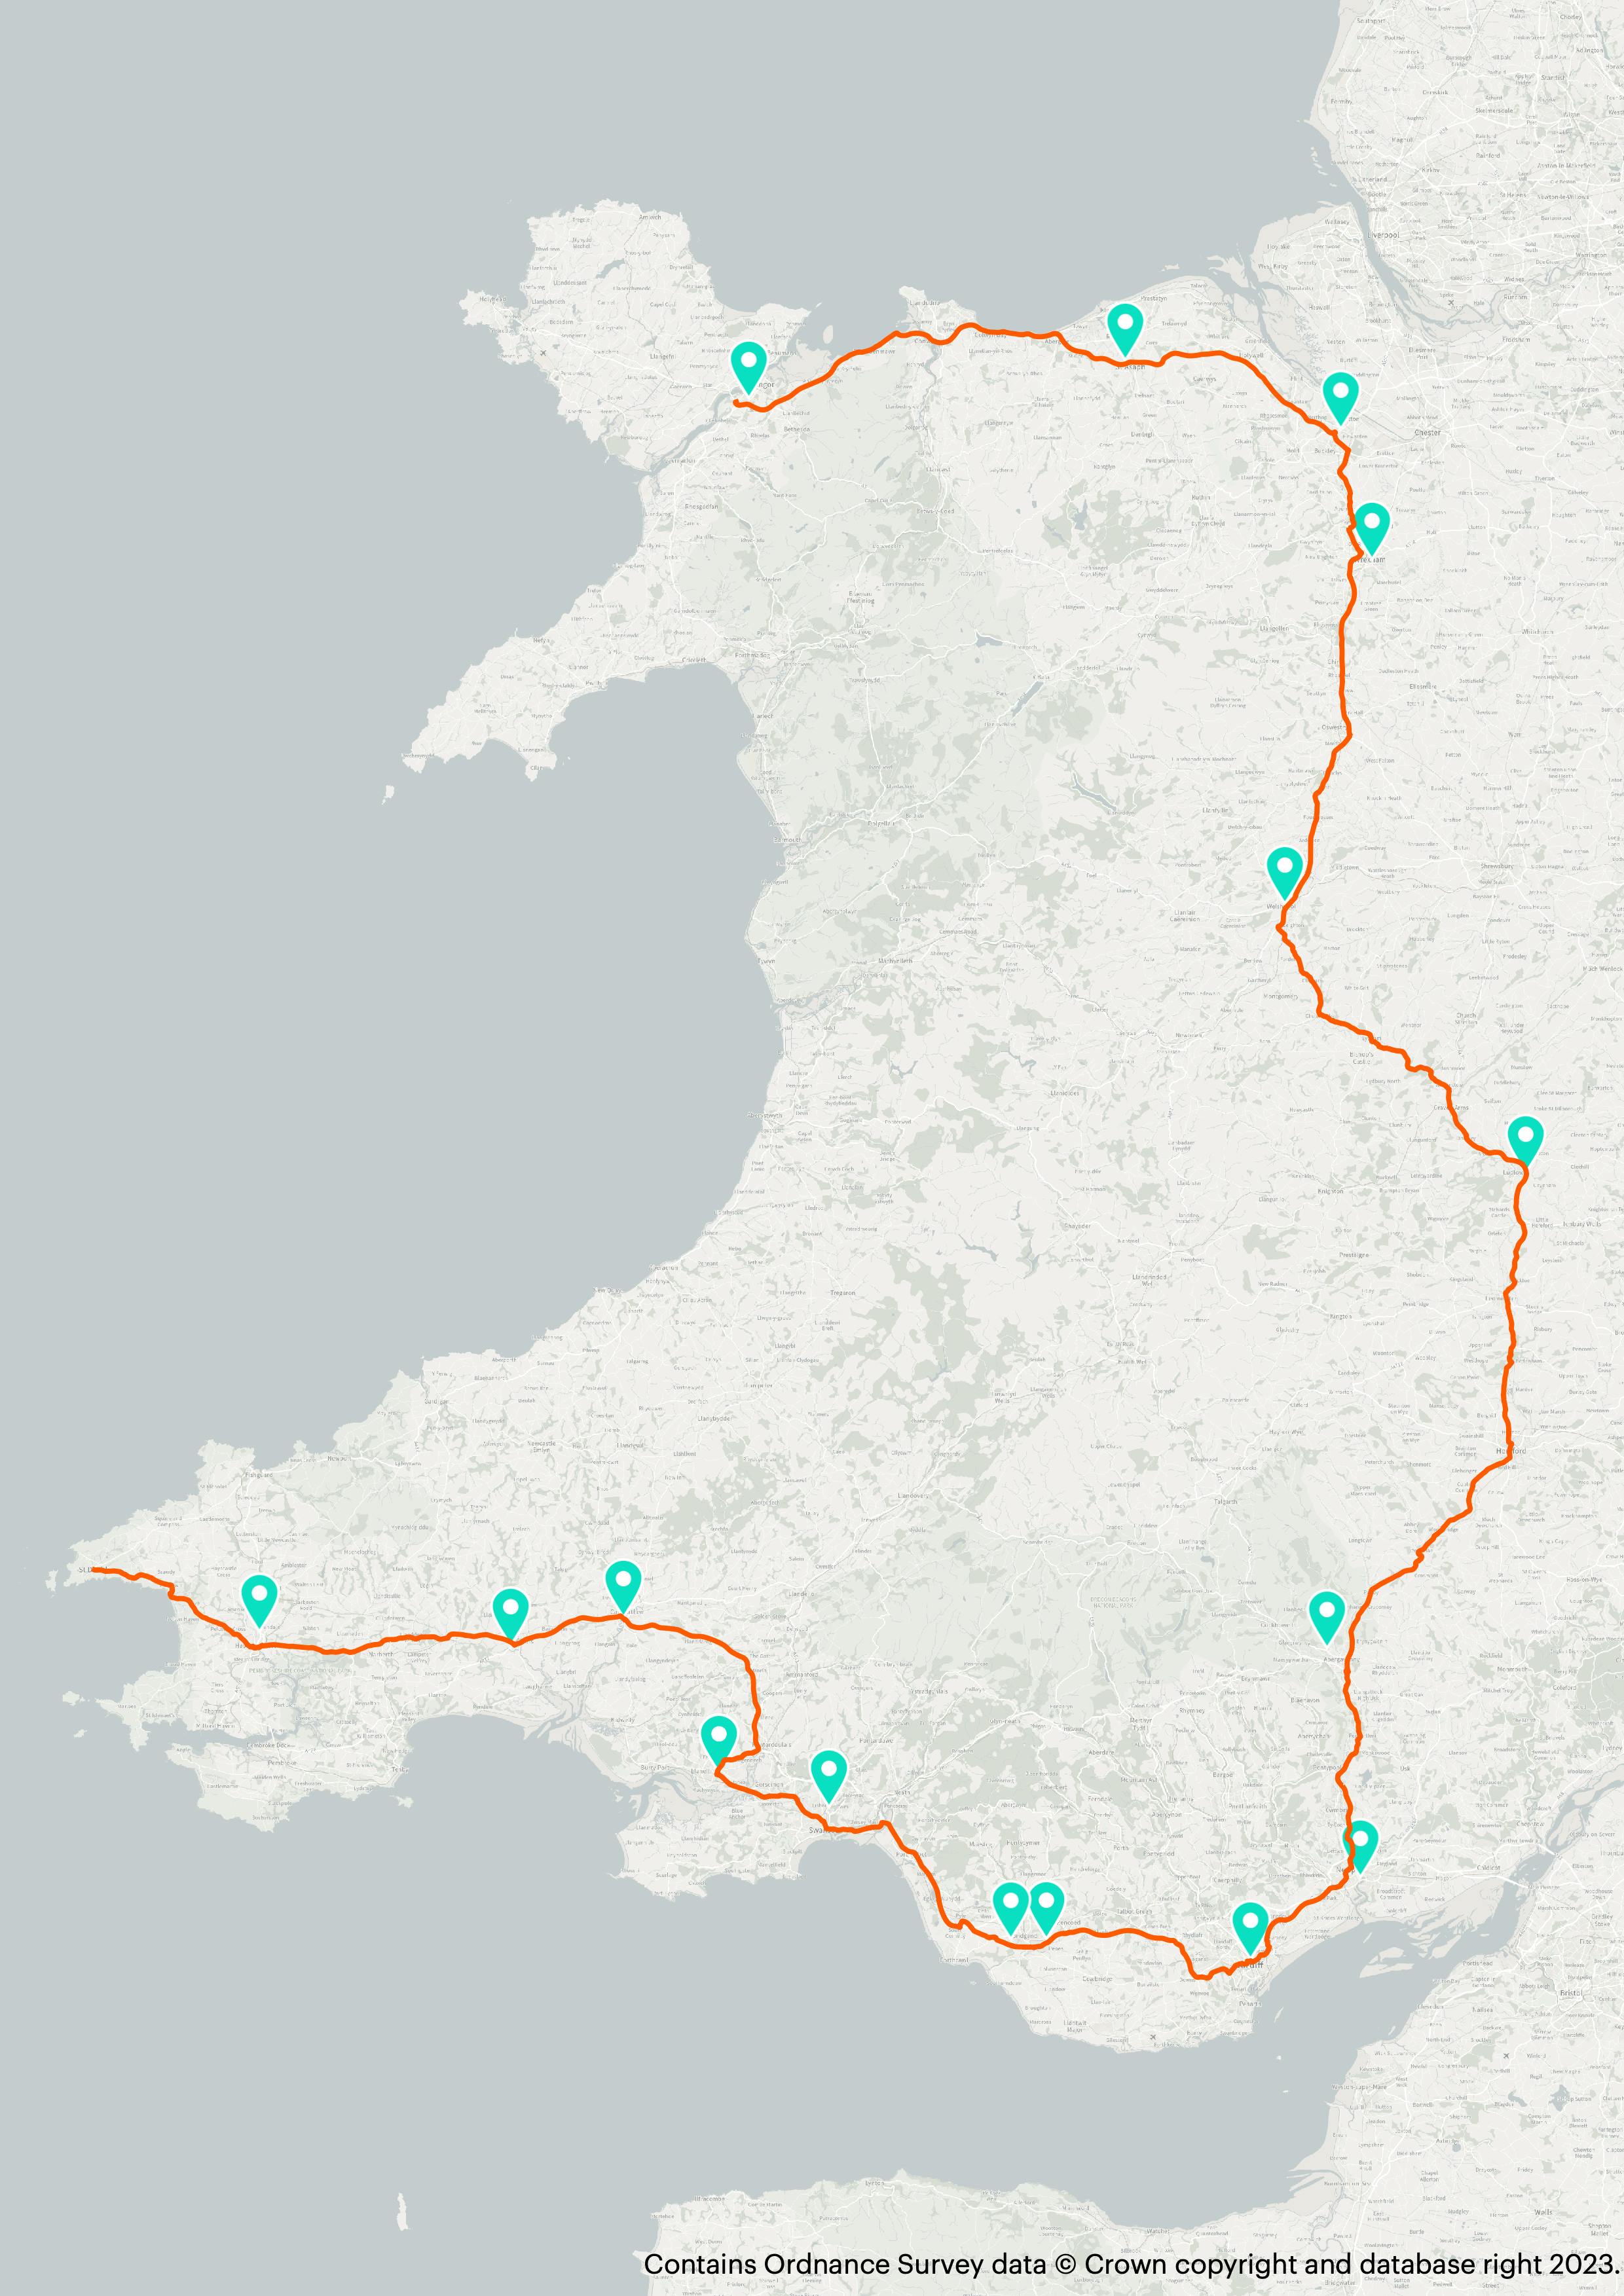 A map showing the journey from Bangor to St Davids along the England-Wales border with Osprey charging stations located along the way